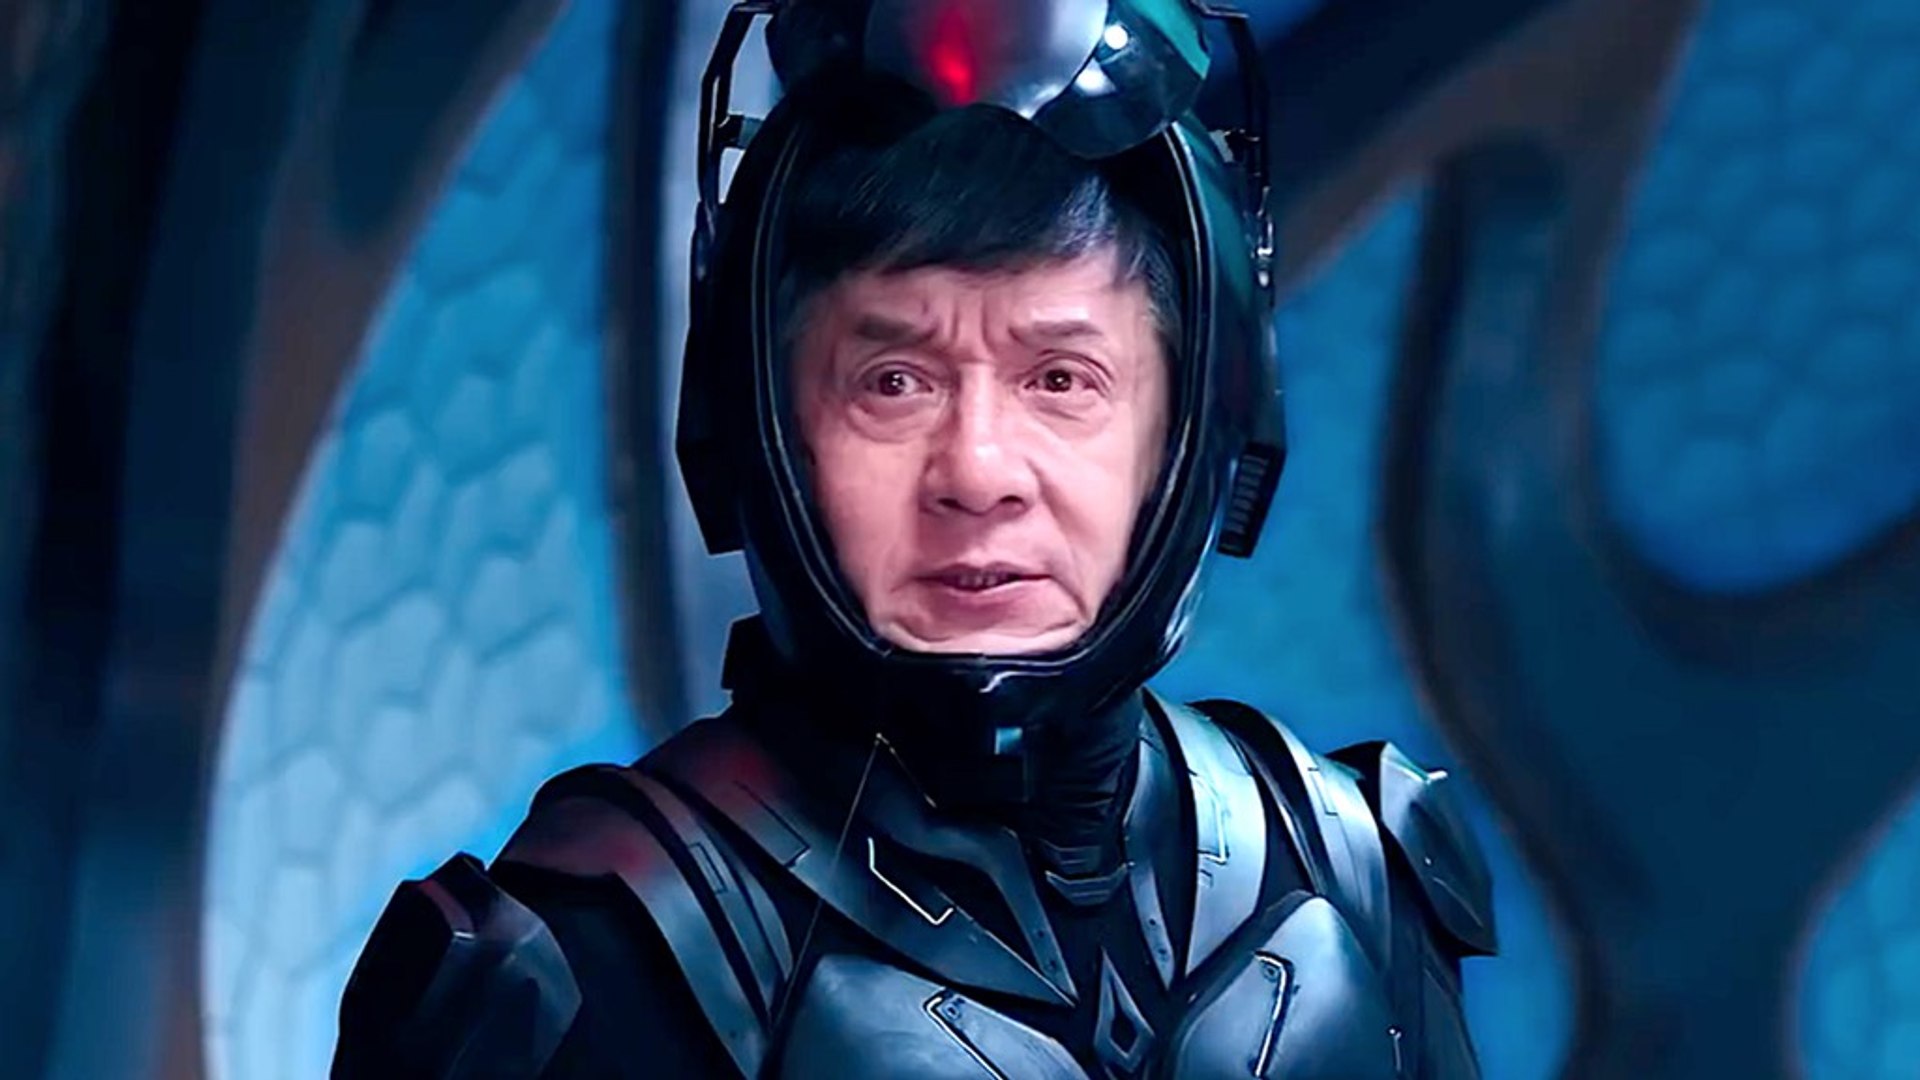 Bleeding Steel with Jackie Chan - Official Trailer - video Dailymotion